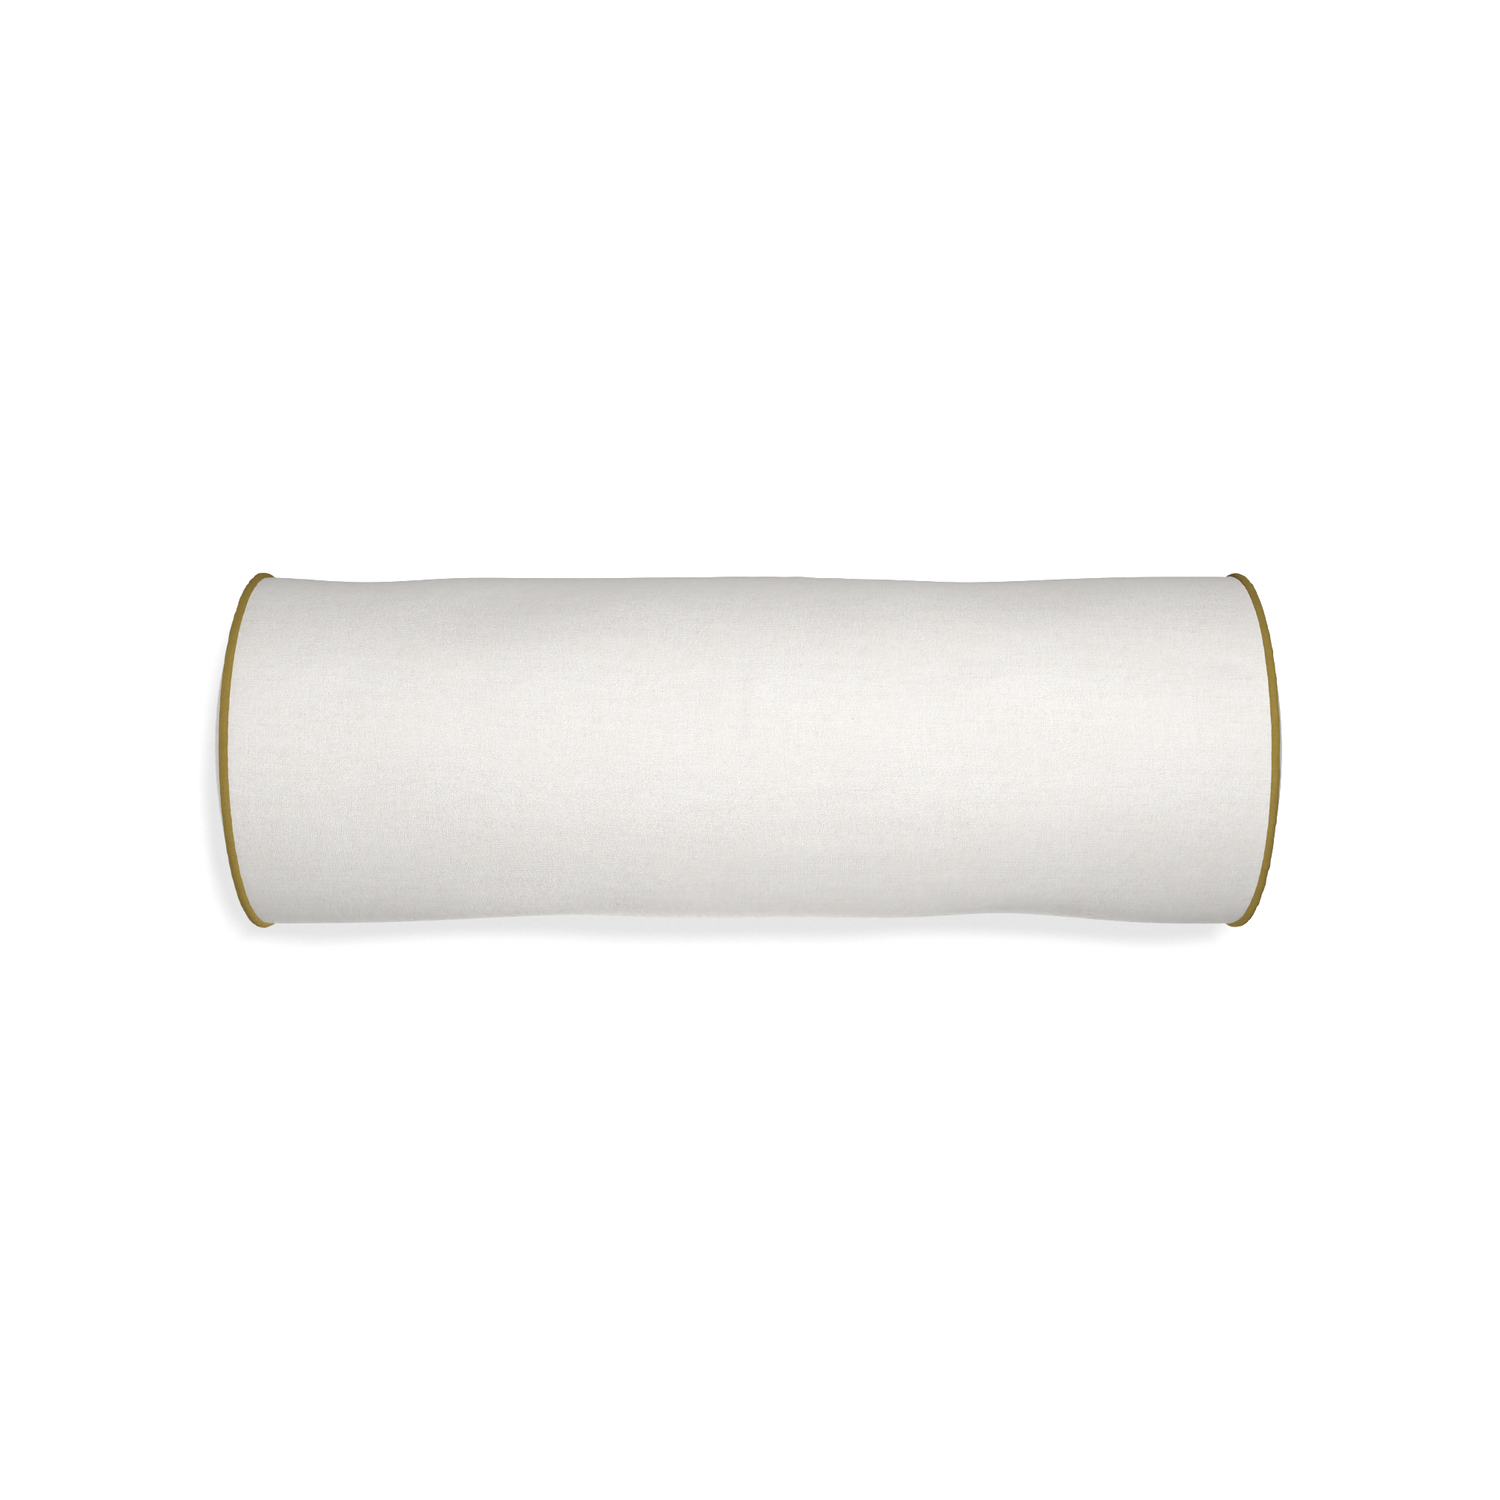 Bolster flour custom natural whitepillow with c piping on white background